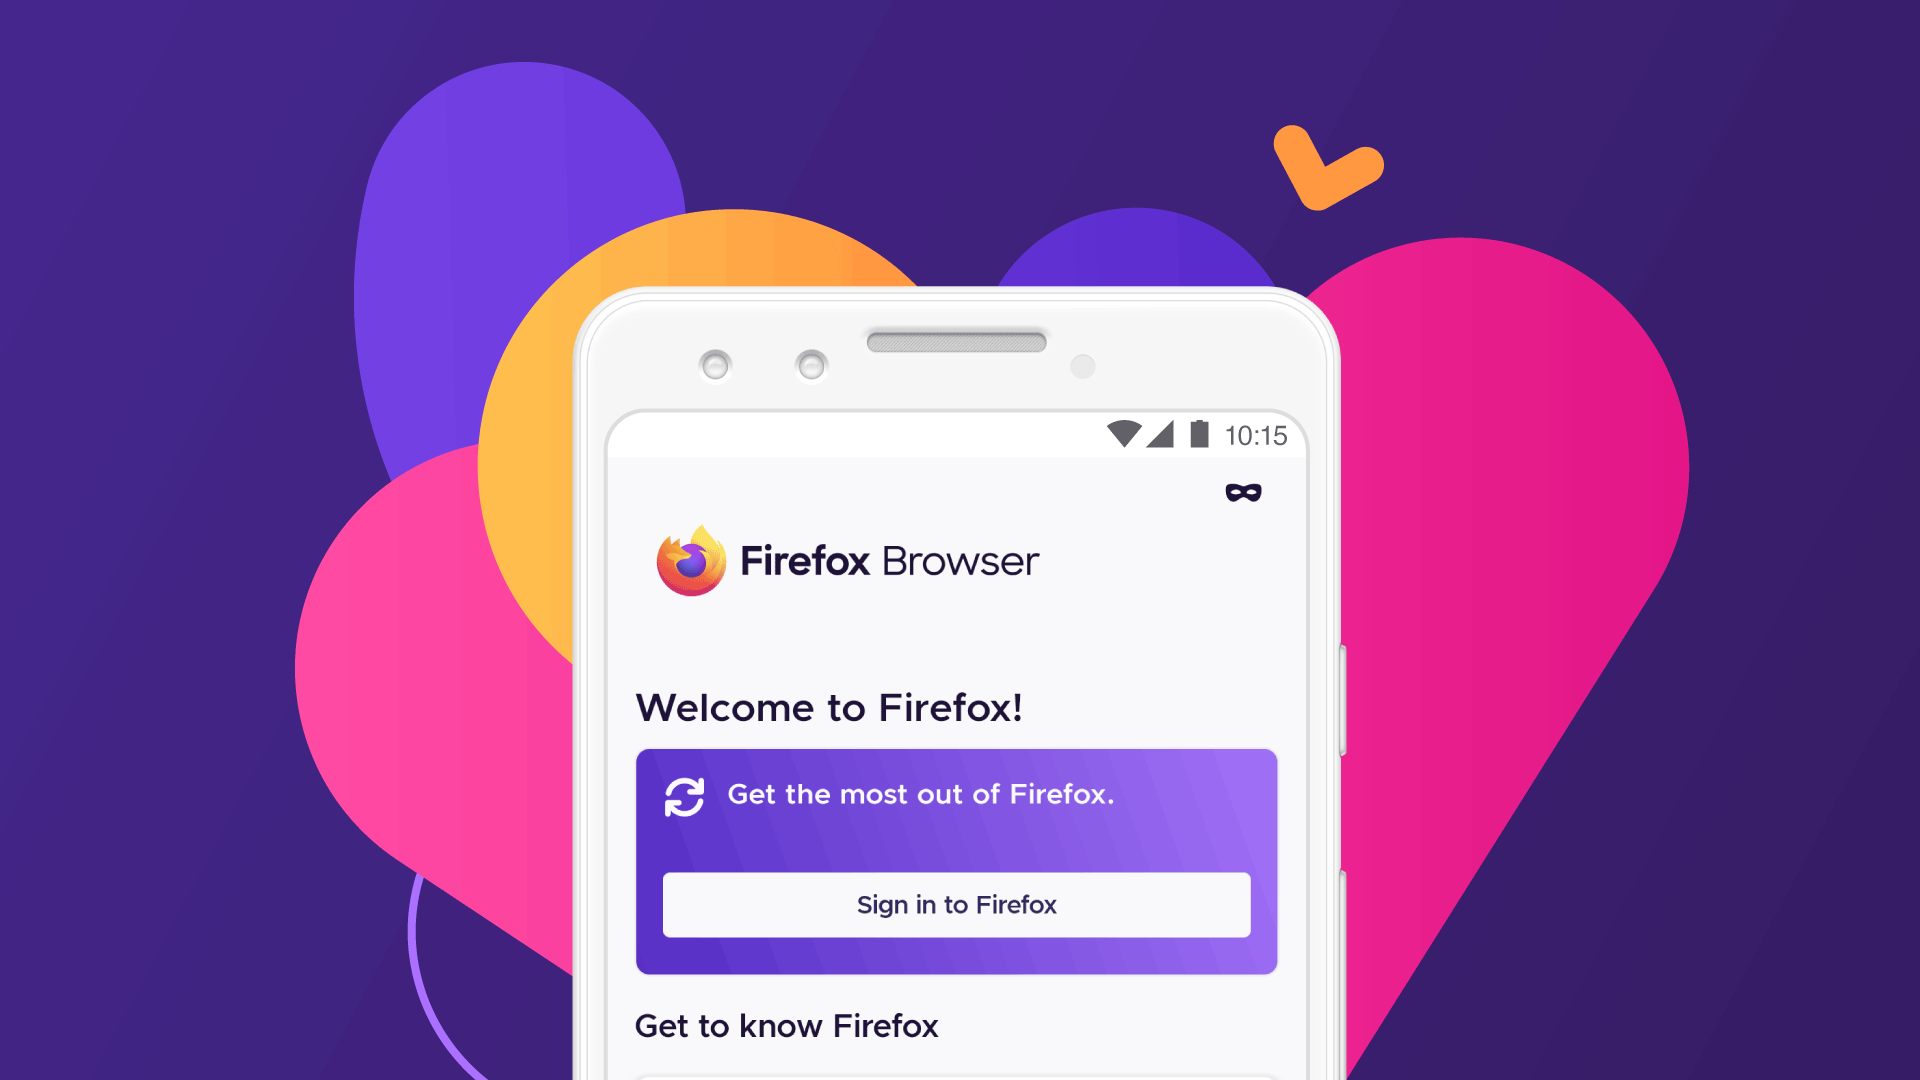 Firefox - Check Out Some Tips on How to Use the App on an Android